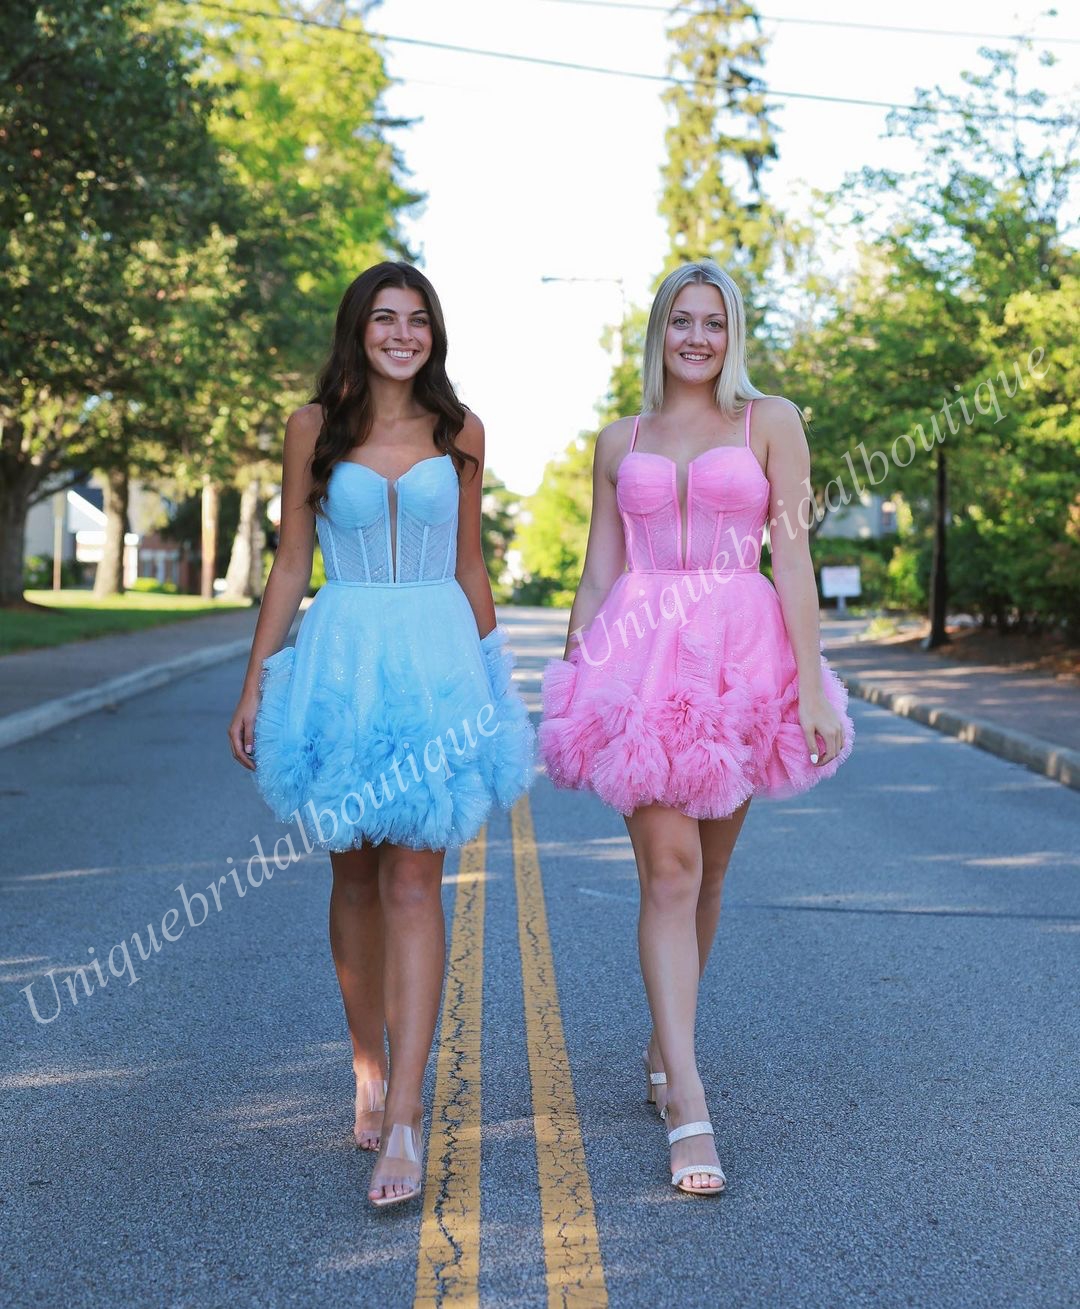 Glitter Tulle Homecoming Dress 2k24 Ruched Corset Short Prom Pageant Winter Formal Cocktail Event Party Runway Black-Tie Gala Graduation Hoco Gown Pink Sky Blue